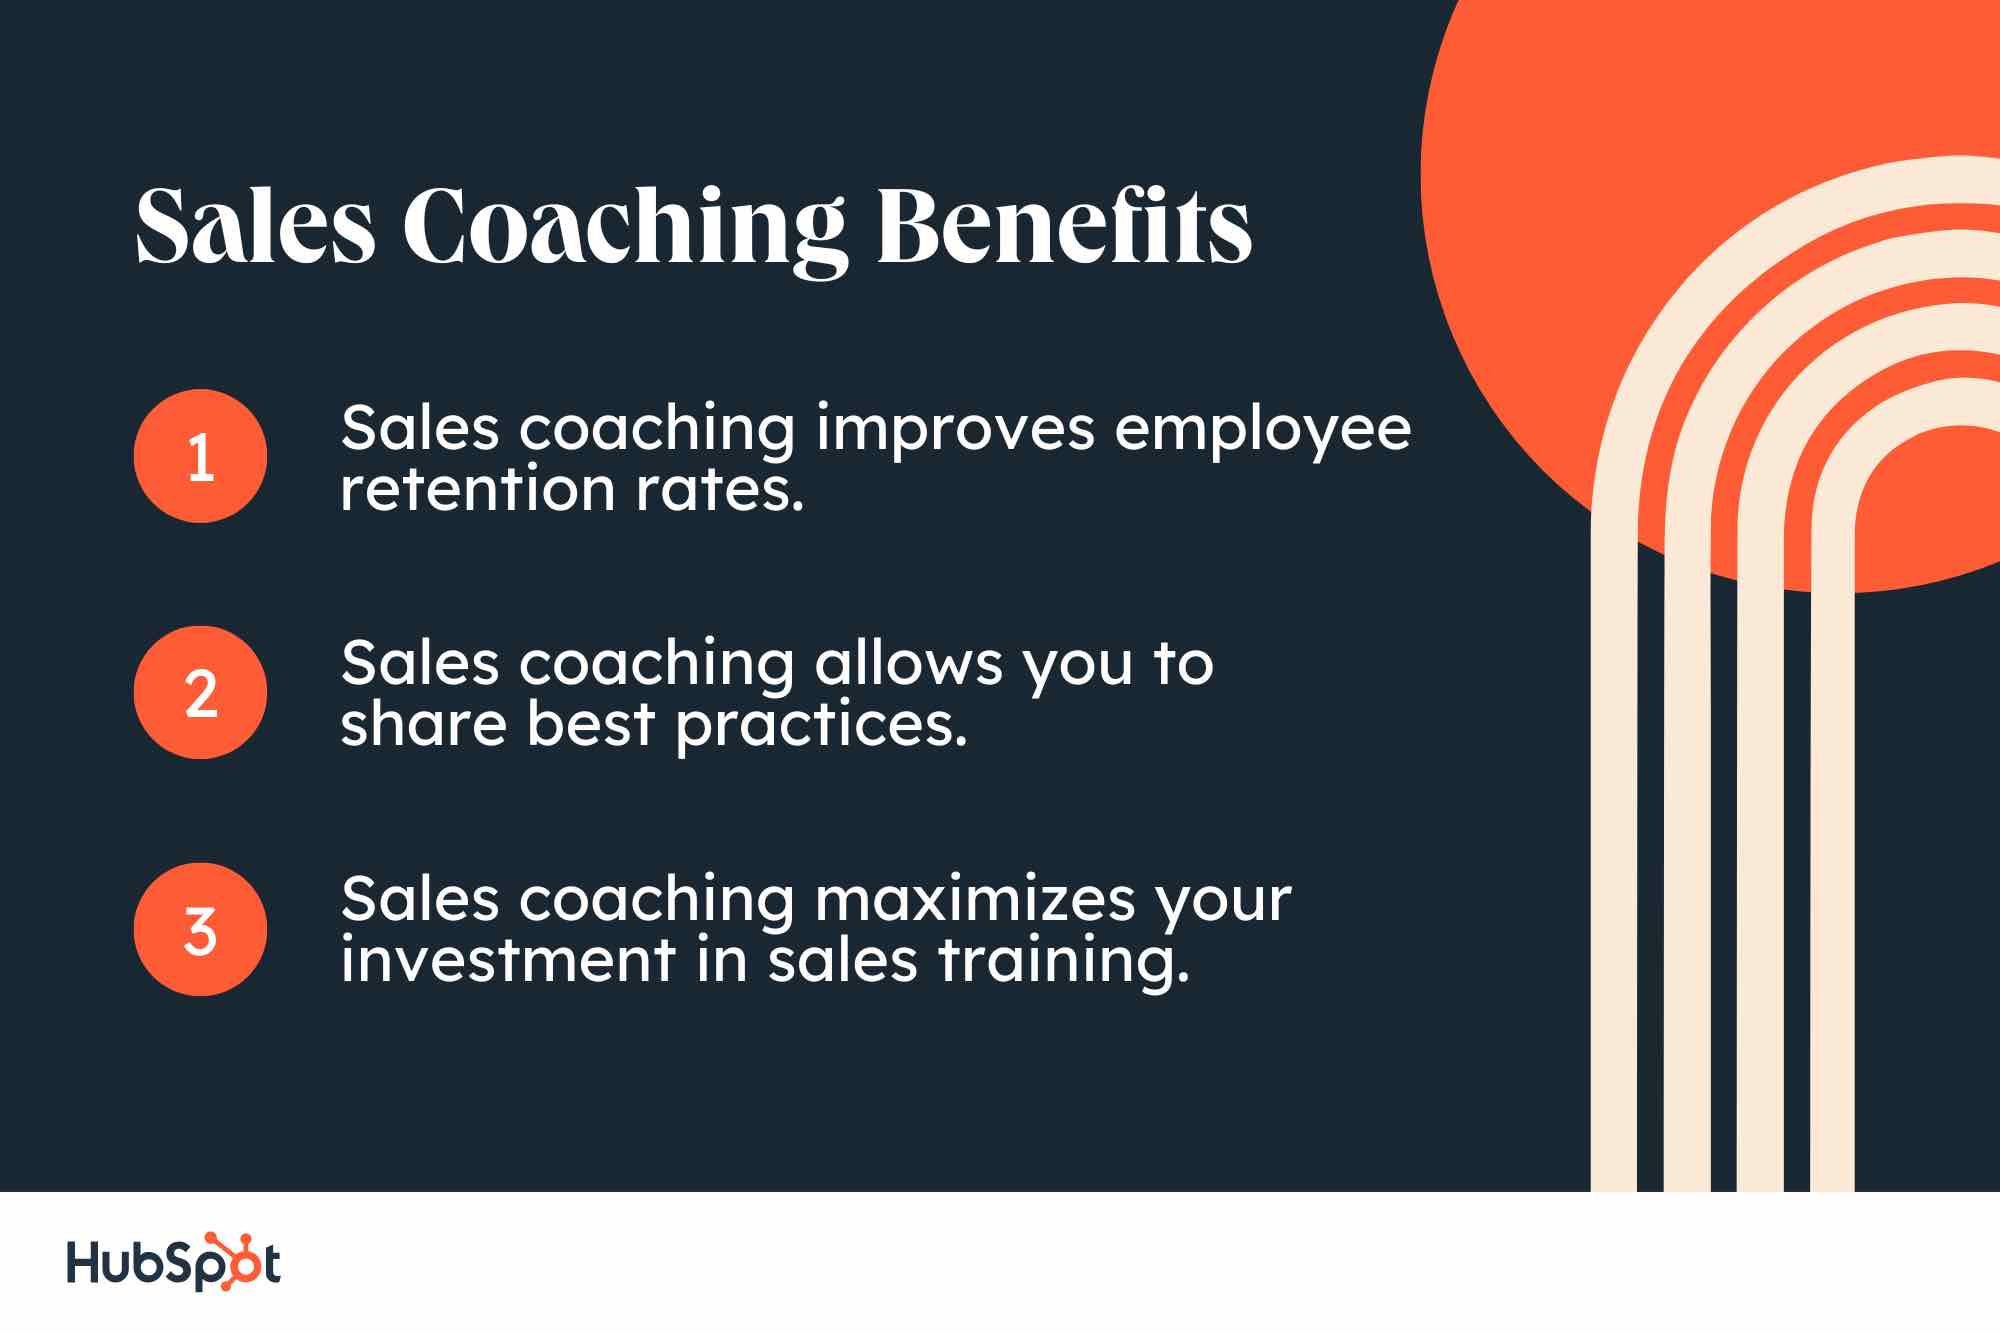 Sales coaching benefits, improve retention rates, share best practices, maximize training investments.